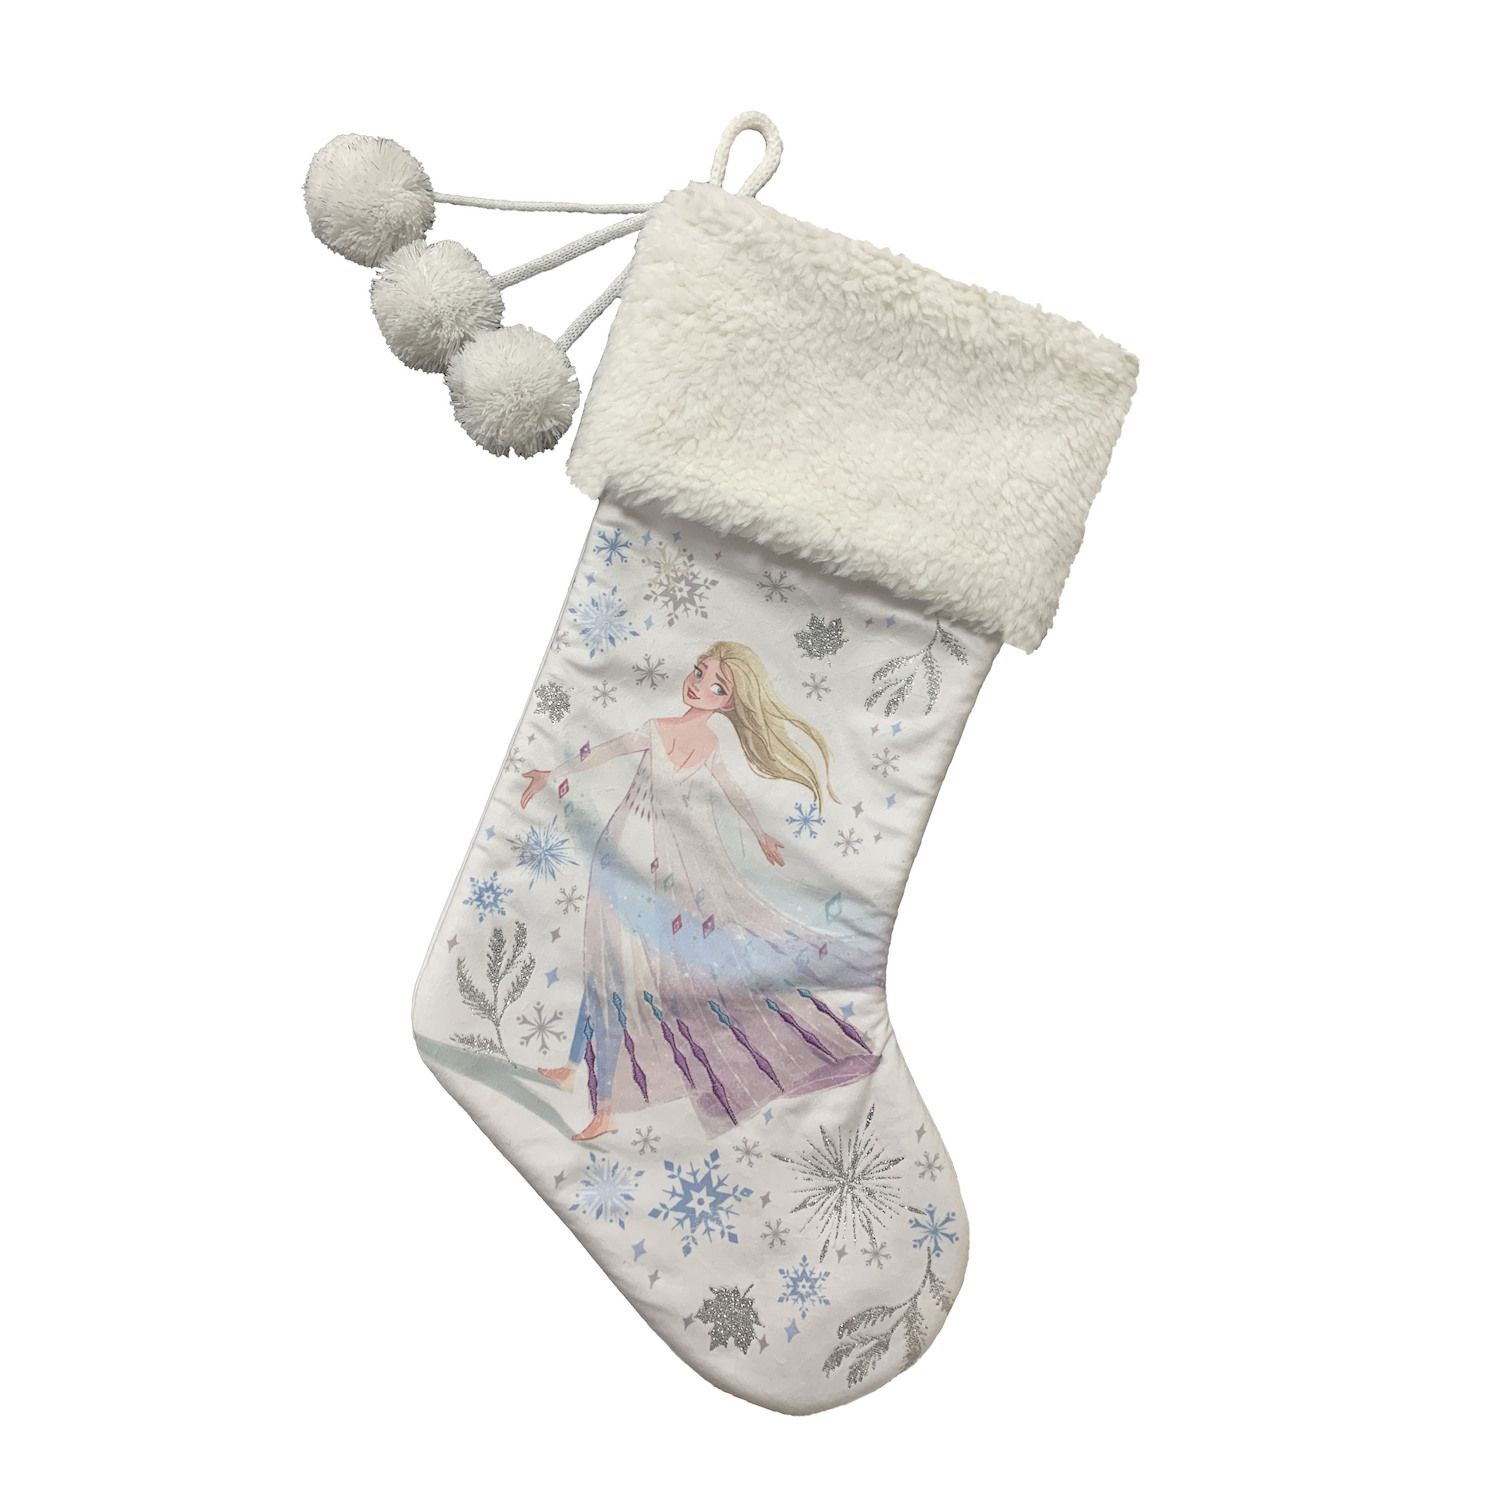 Image for Disney Frozen Elsa Christmas Stocking by St. Nicholas Square® at Kohl's.